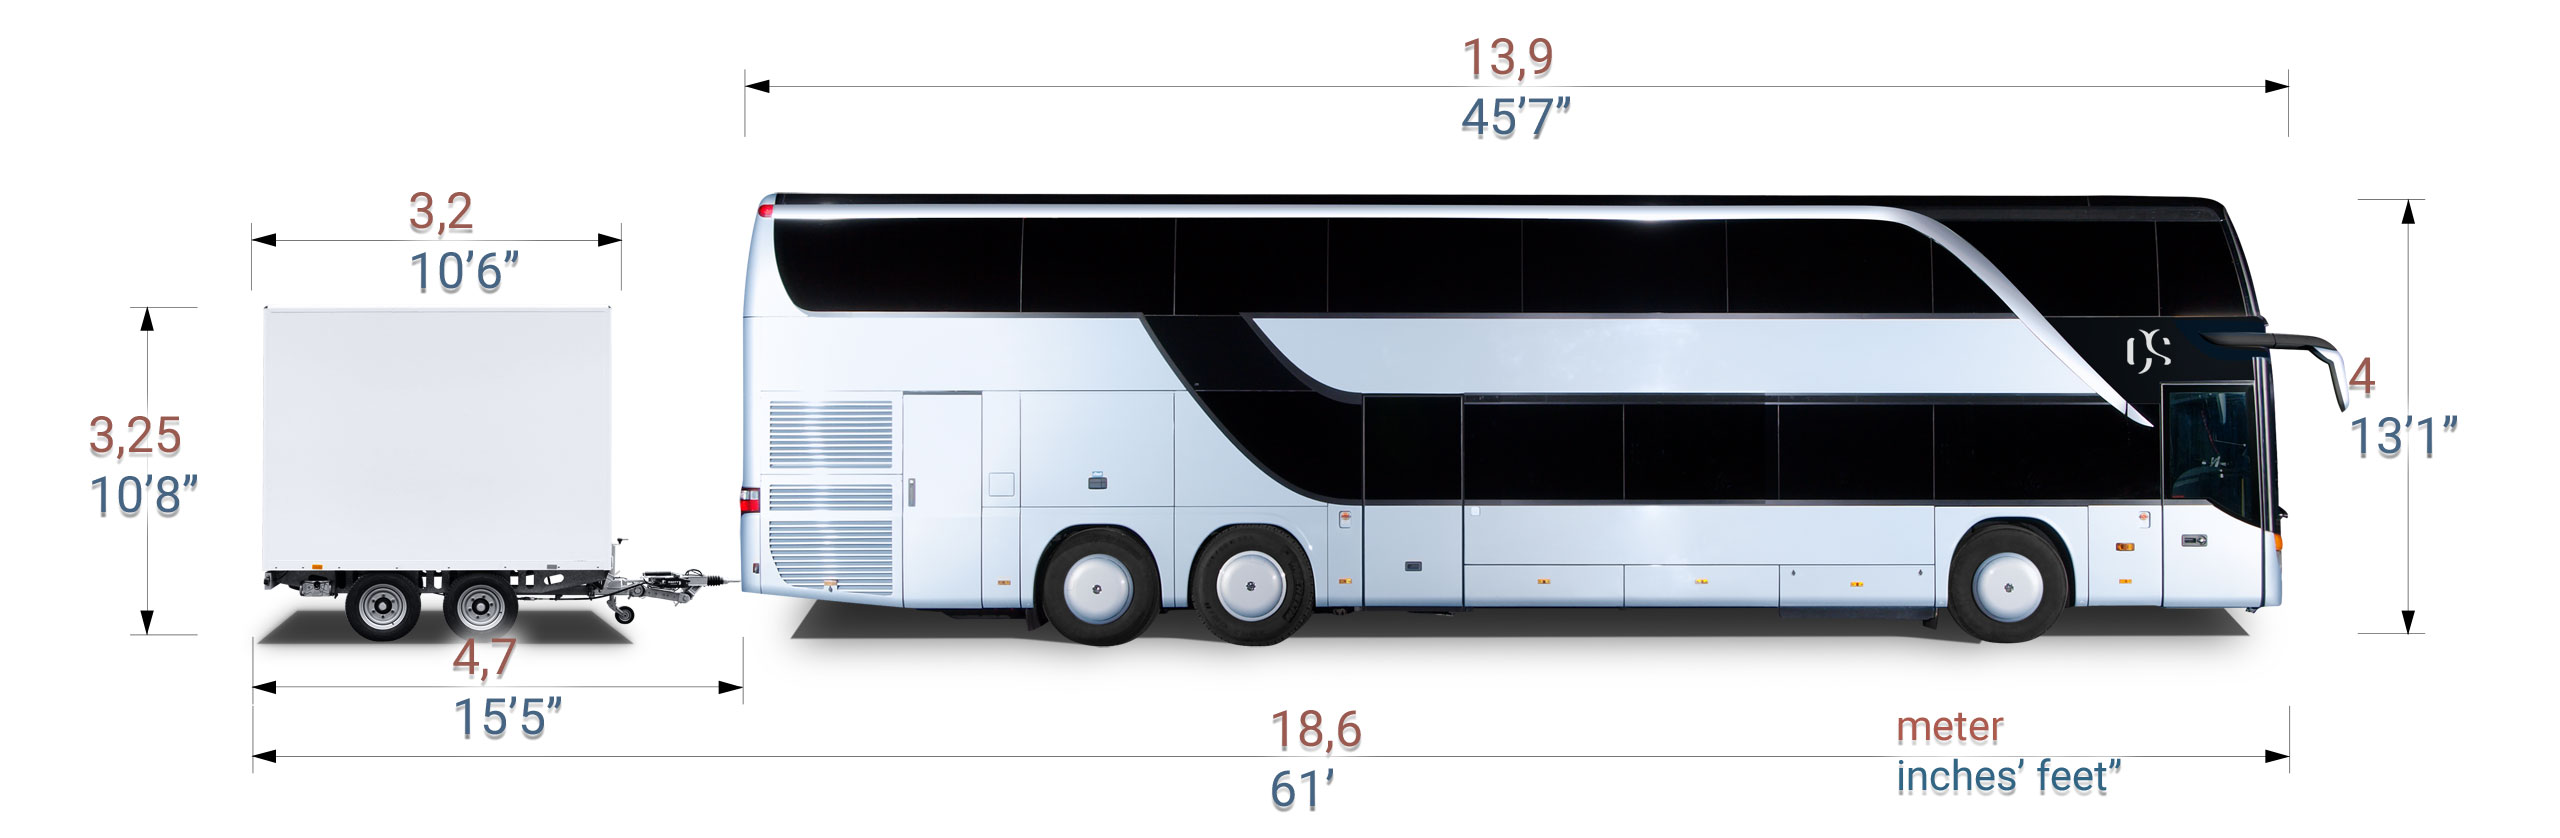 tour bus dimensions height